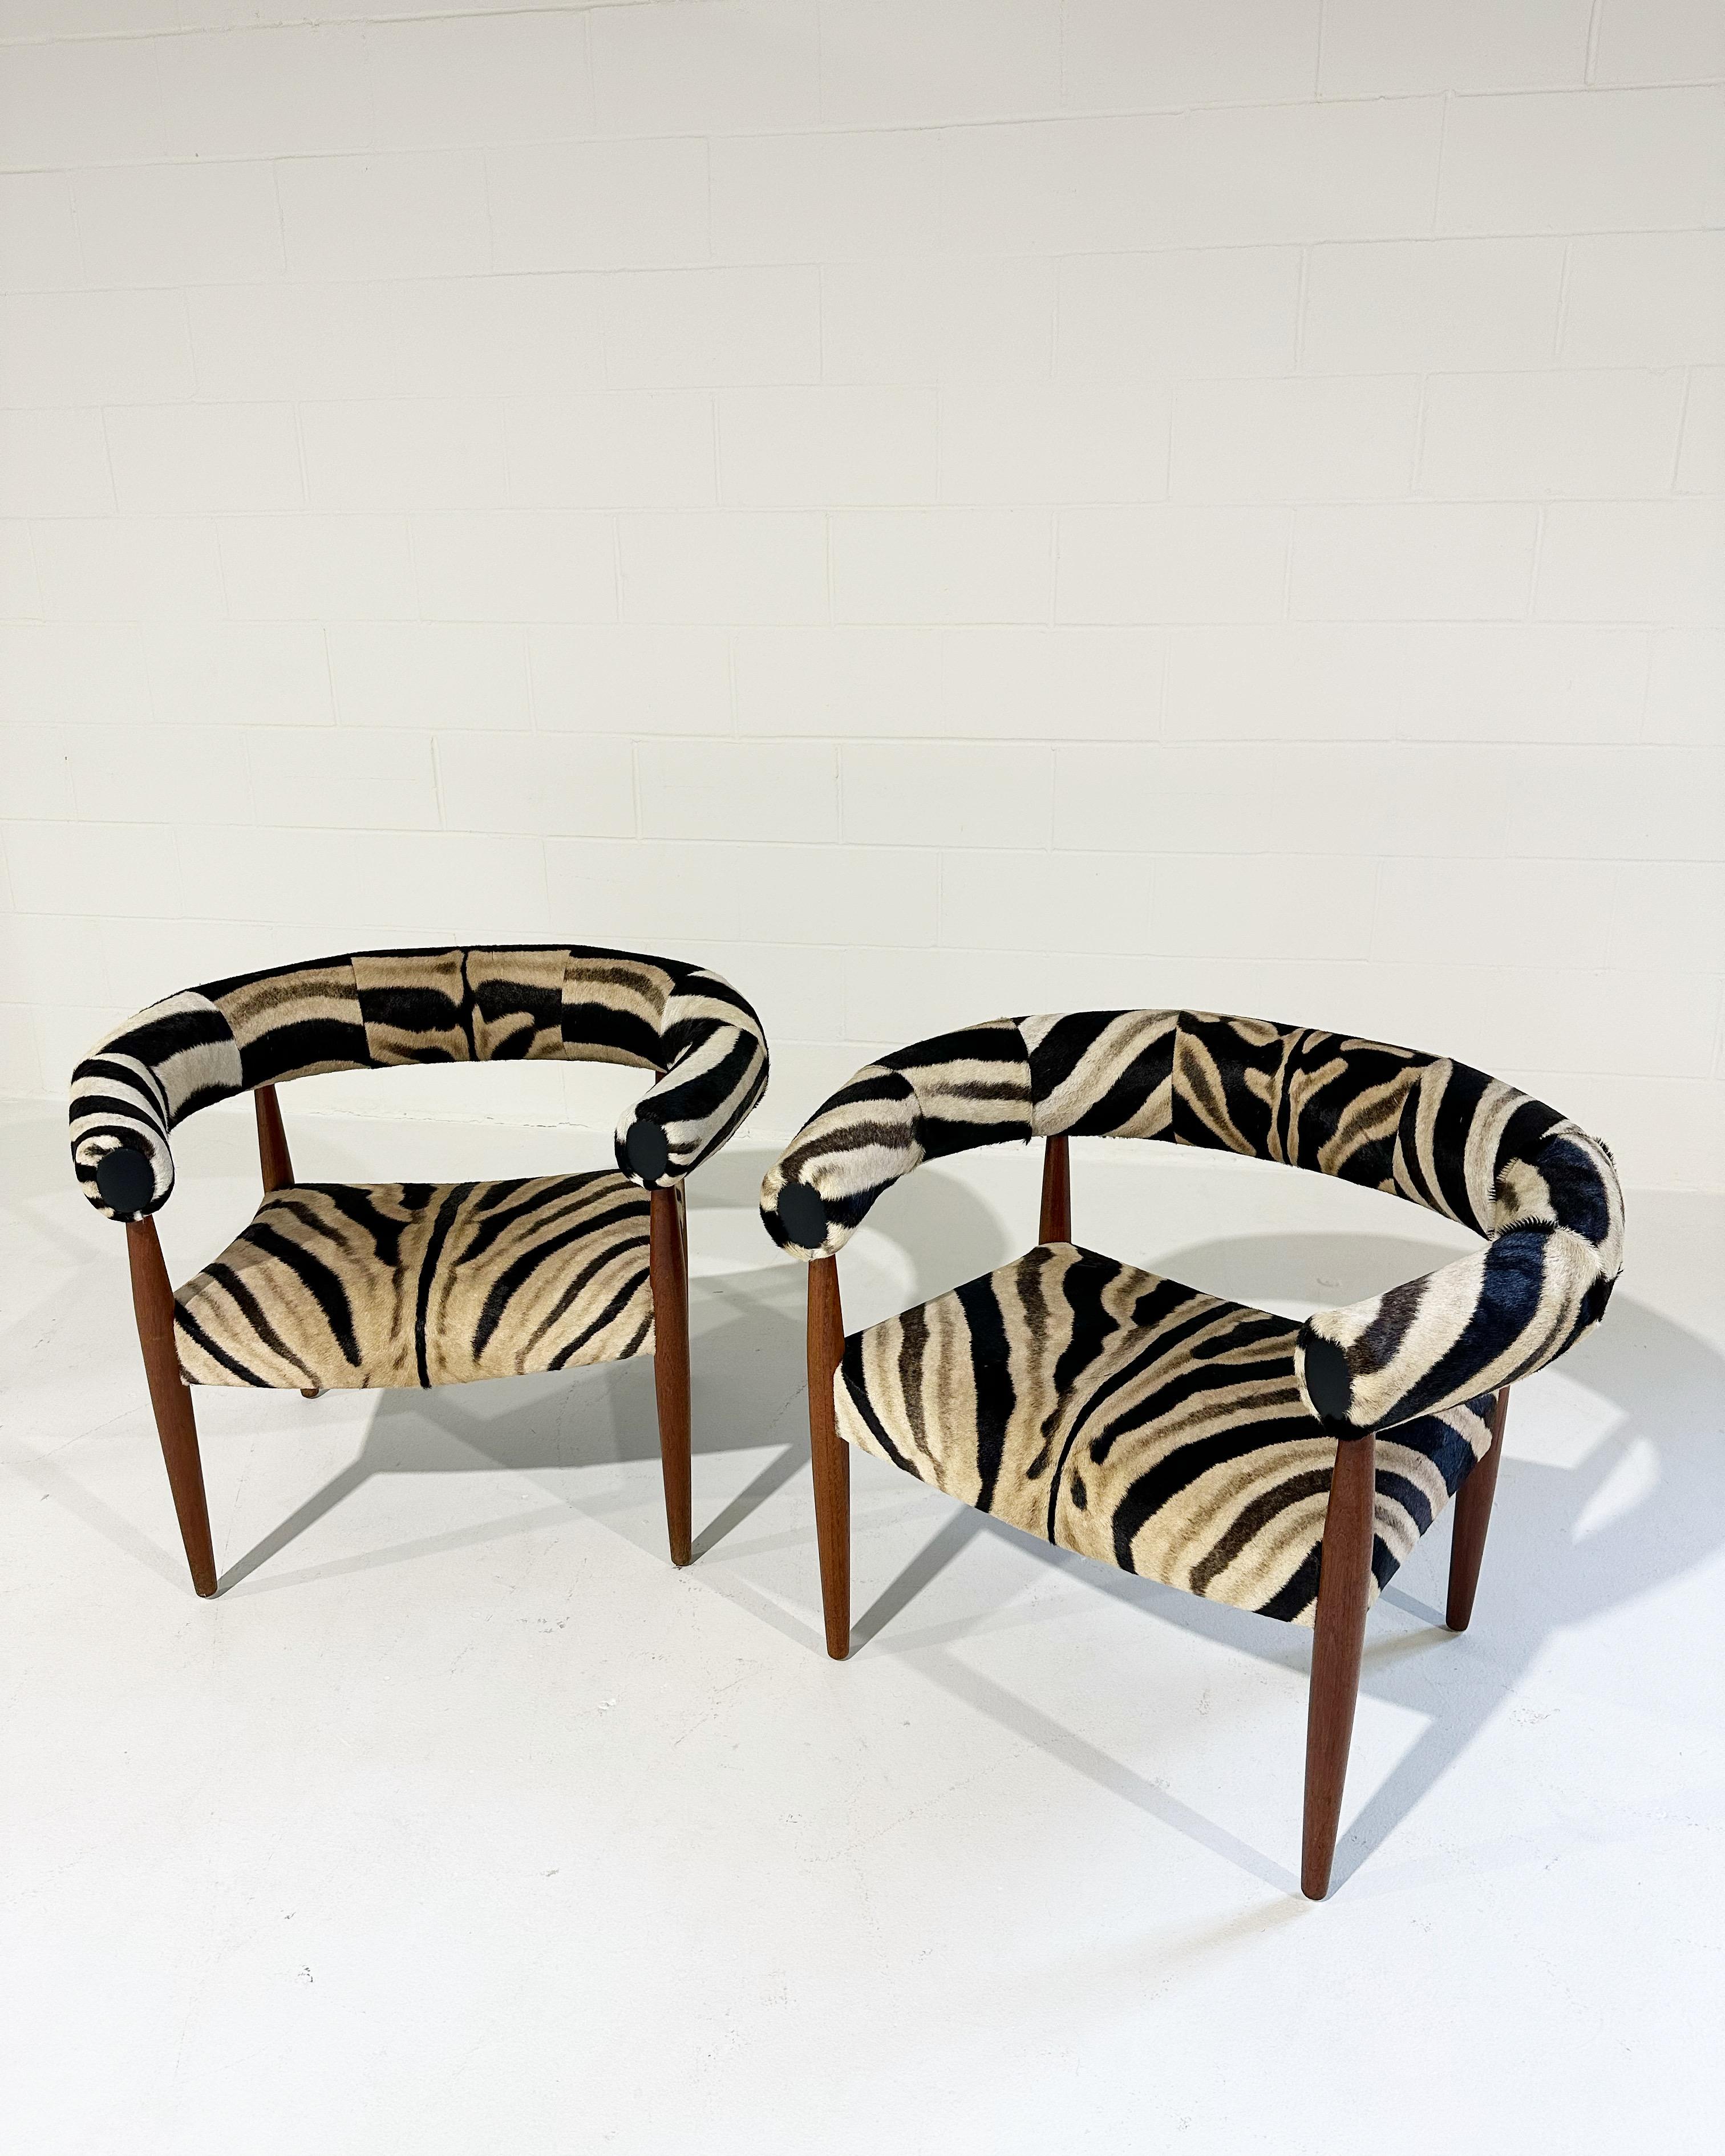 A very cool pair of sculptural Danish chairs. Restored in zebra hide. 

Manufacturer
Søren Willadsen, Denmark

Date
1958

Dimensions
32 W x 28 D x 25.5 H in

Material
Teak, upholstery, leather

Condition
Very good condition. Newer upholstered in our